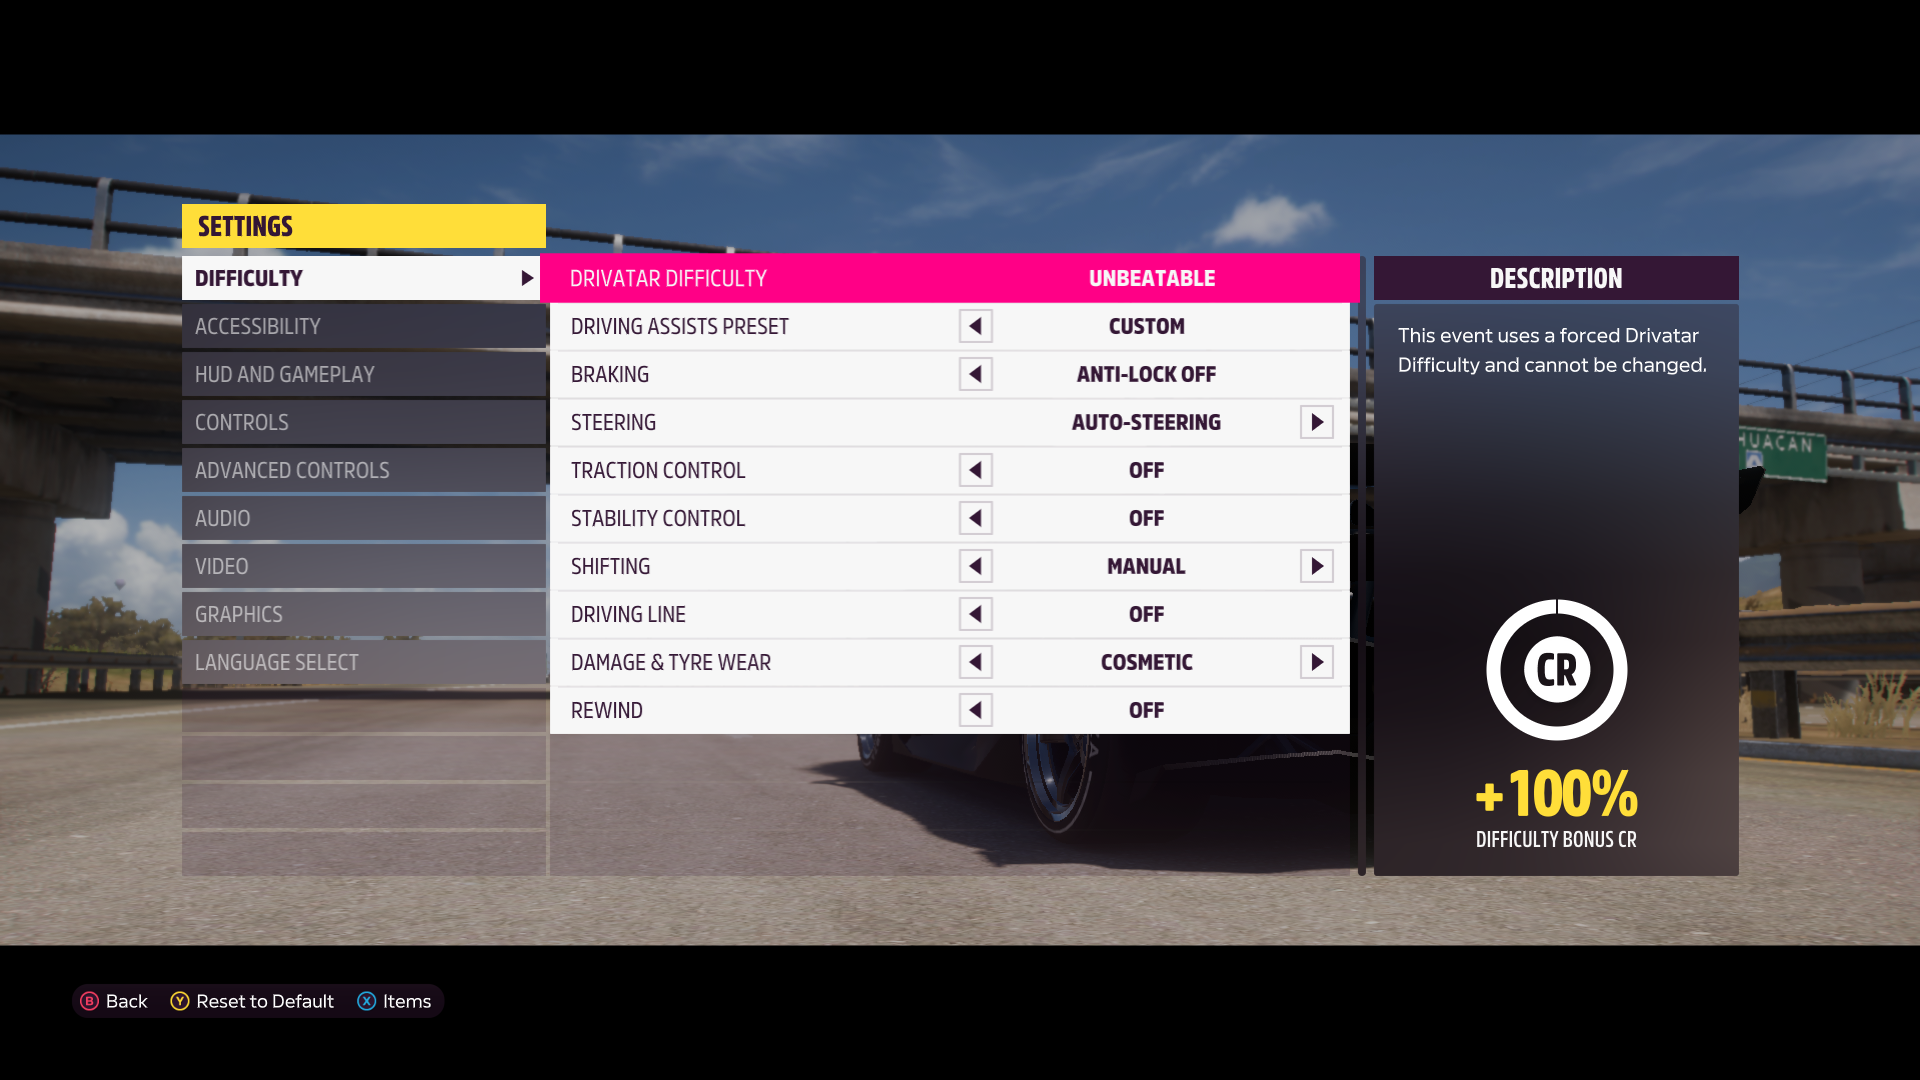 Forza Horizon 5 Tips How to Earn Super Wheelspins - Easy way to get Skill points - 99D5EF6